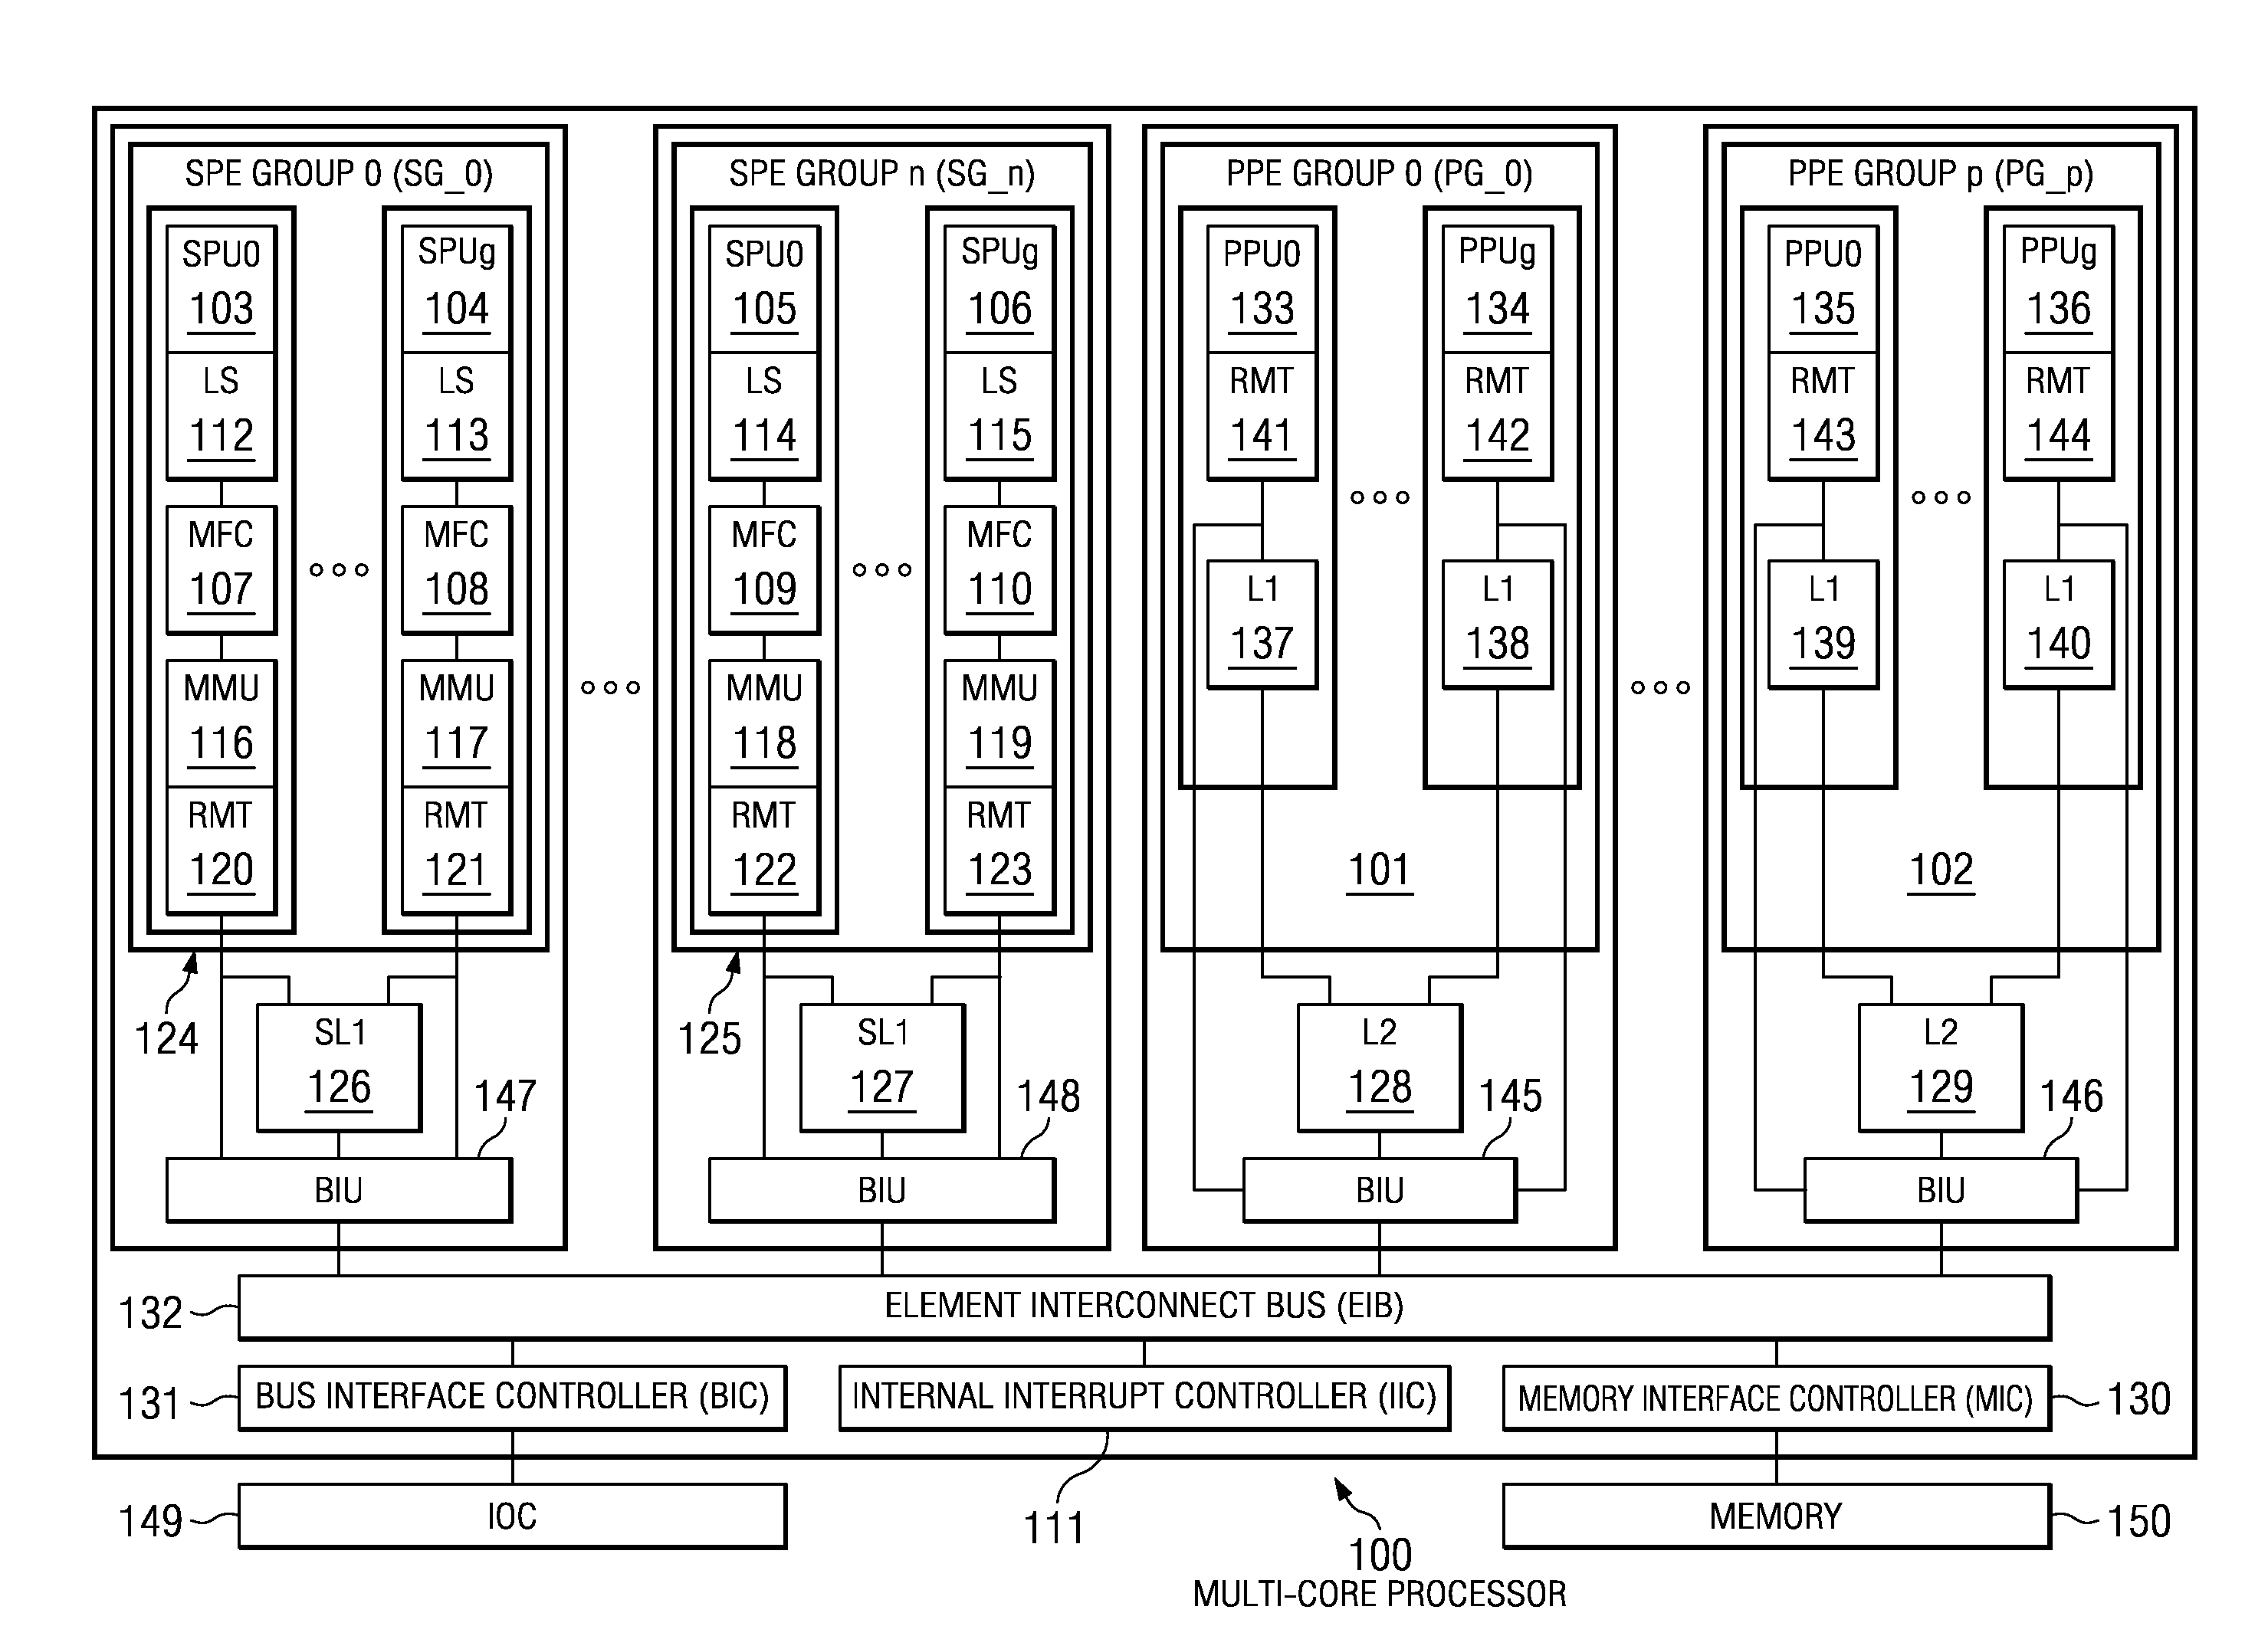 Reducing Cache Pollution of a Software Controlled Cache